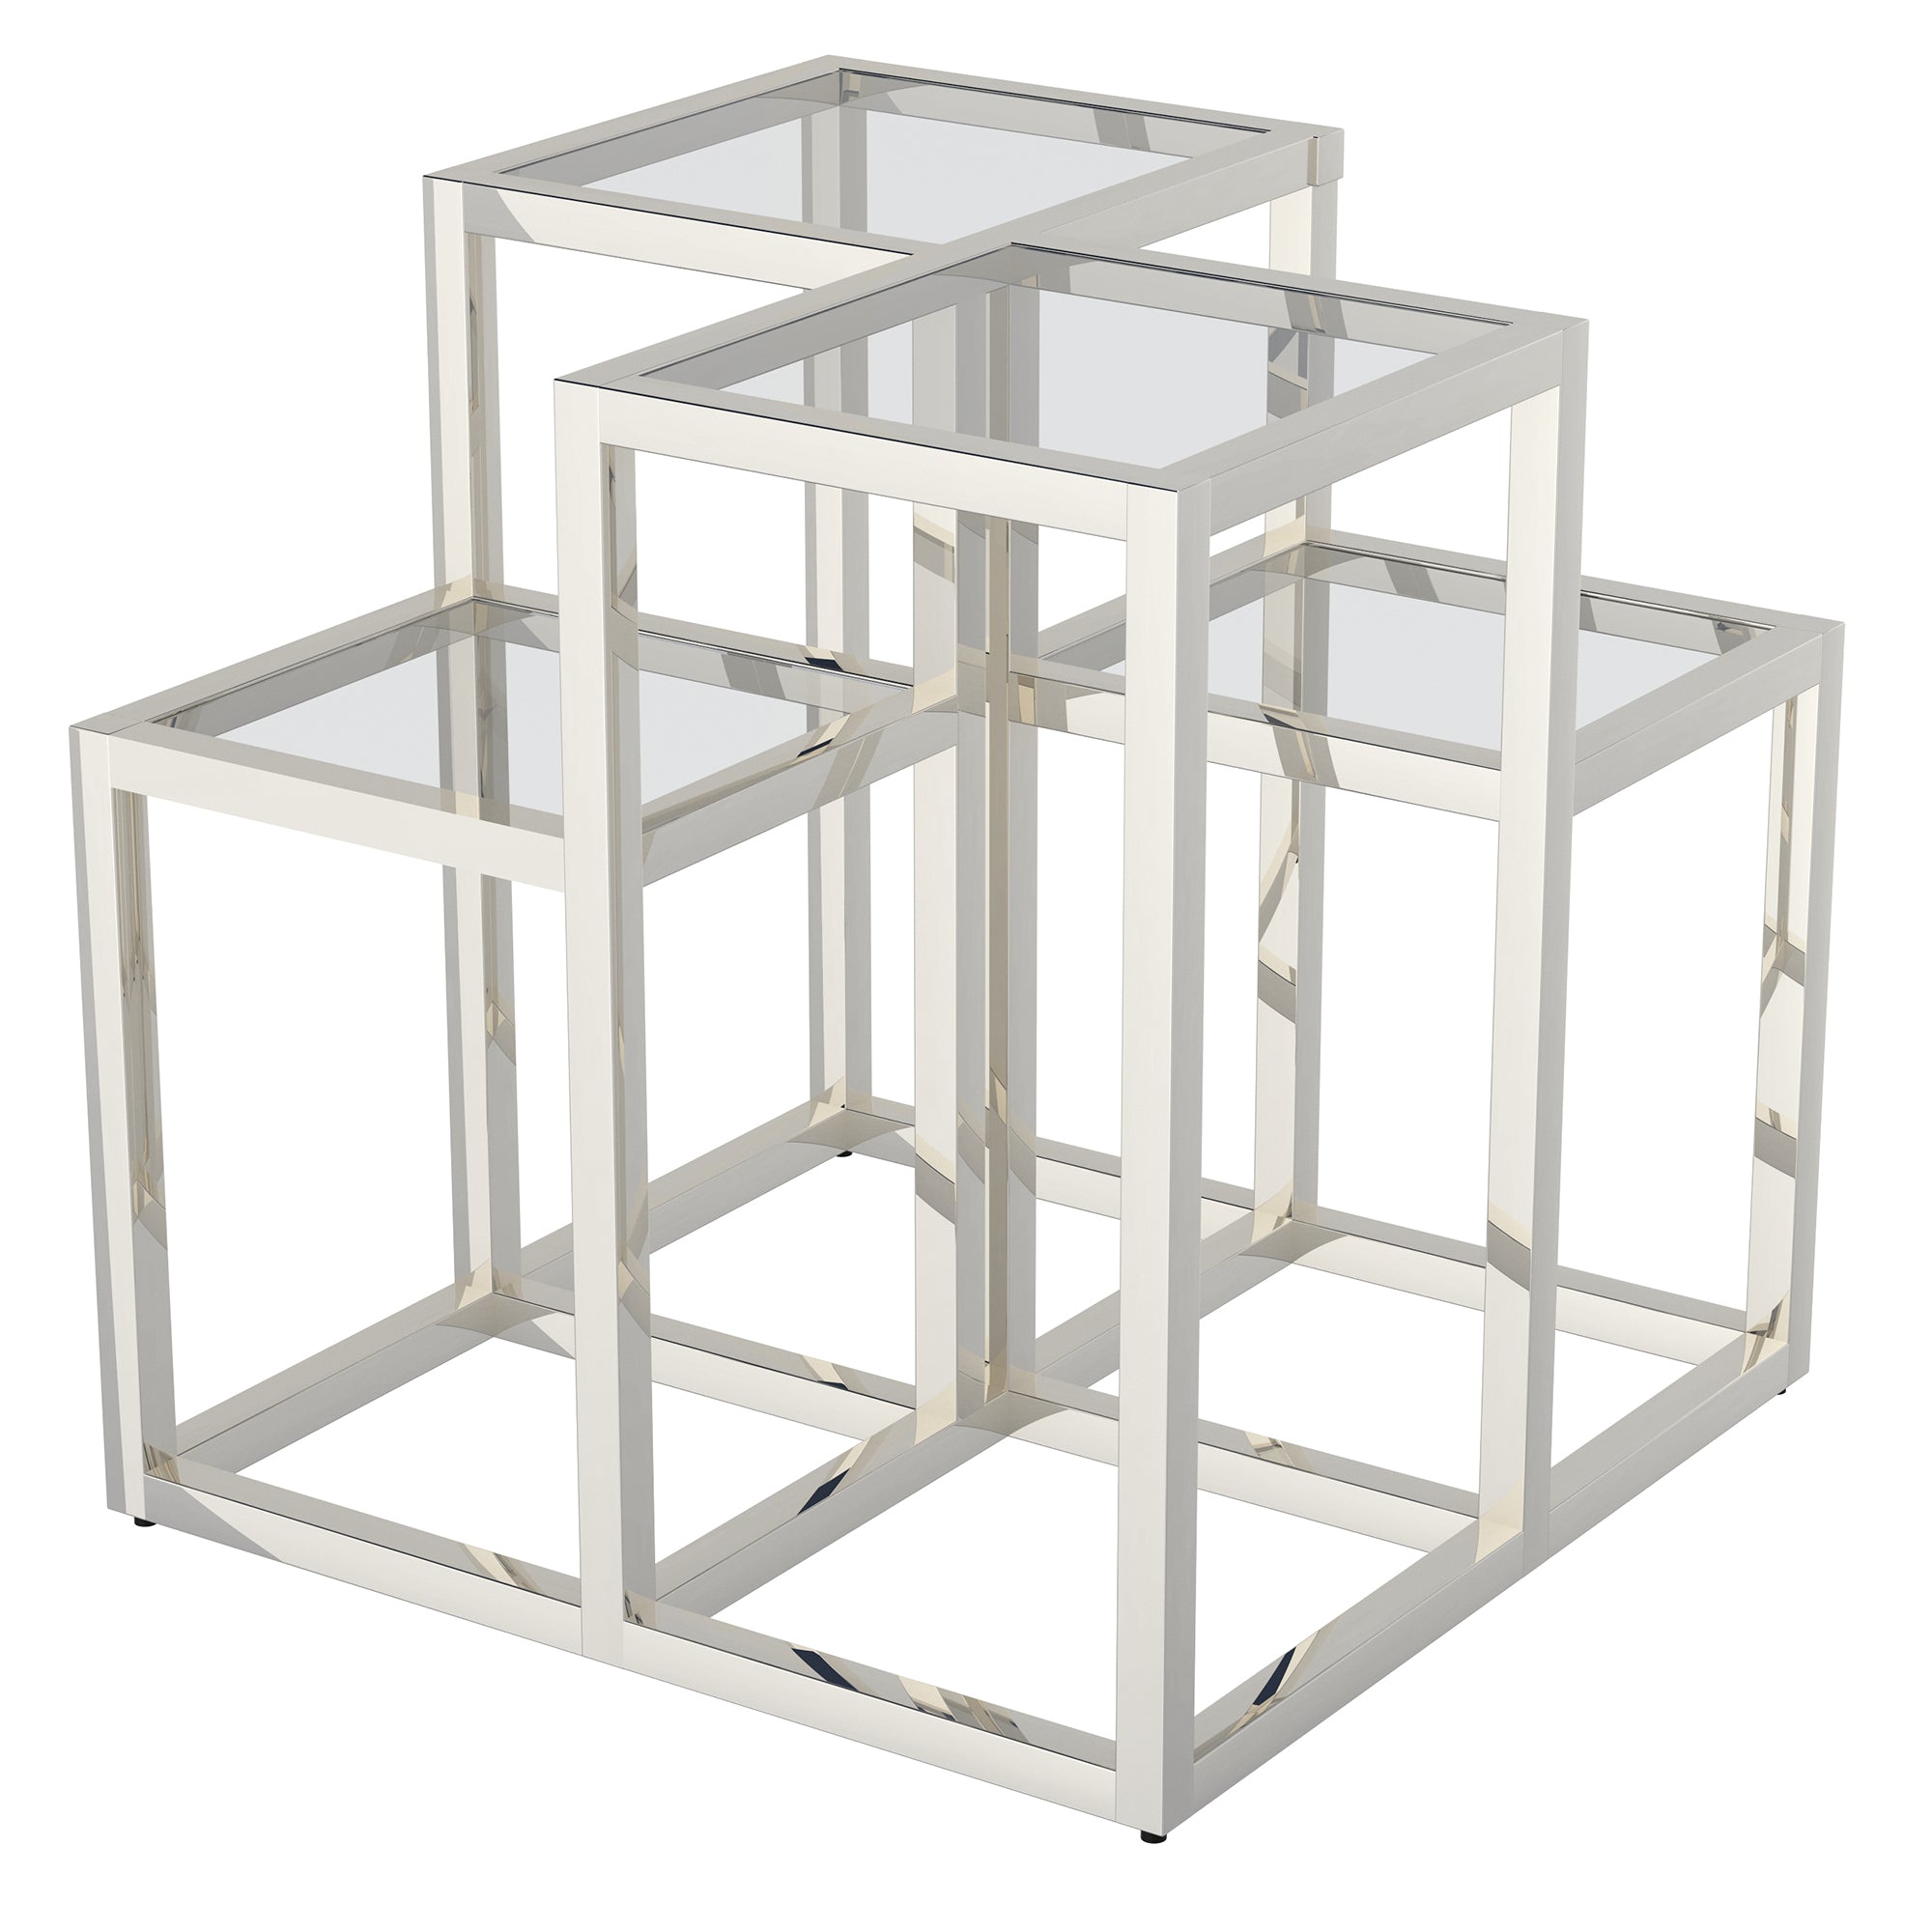 CASINI MULTI-TIERED ACCENT TABLE-Accent Table-Worldwide Homefurnishings Inc-Wall2Wall Furnishings